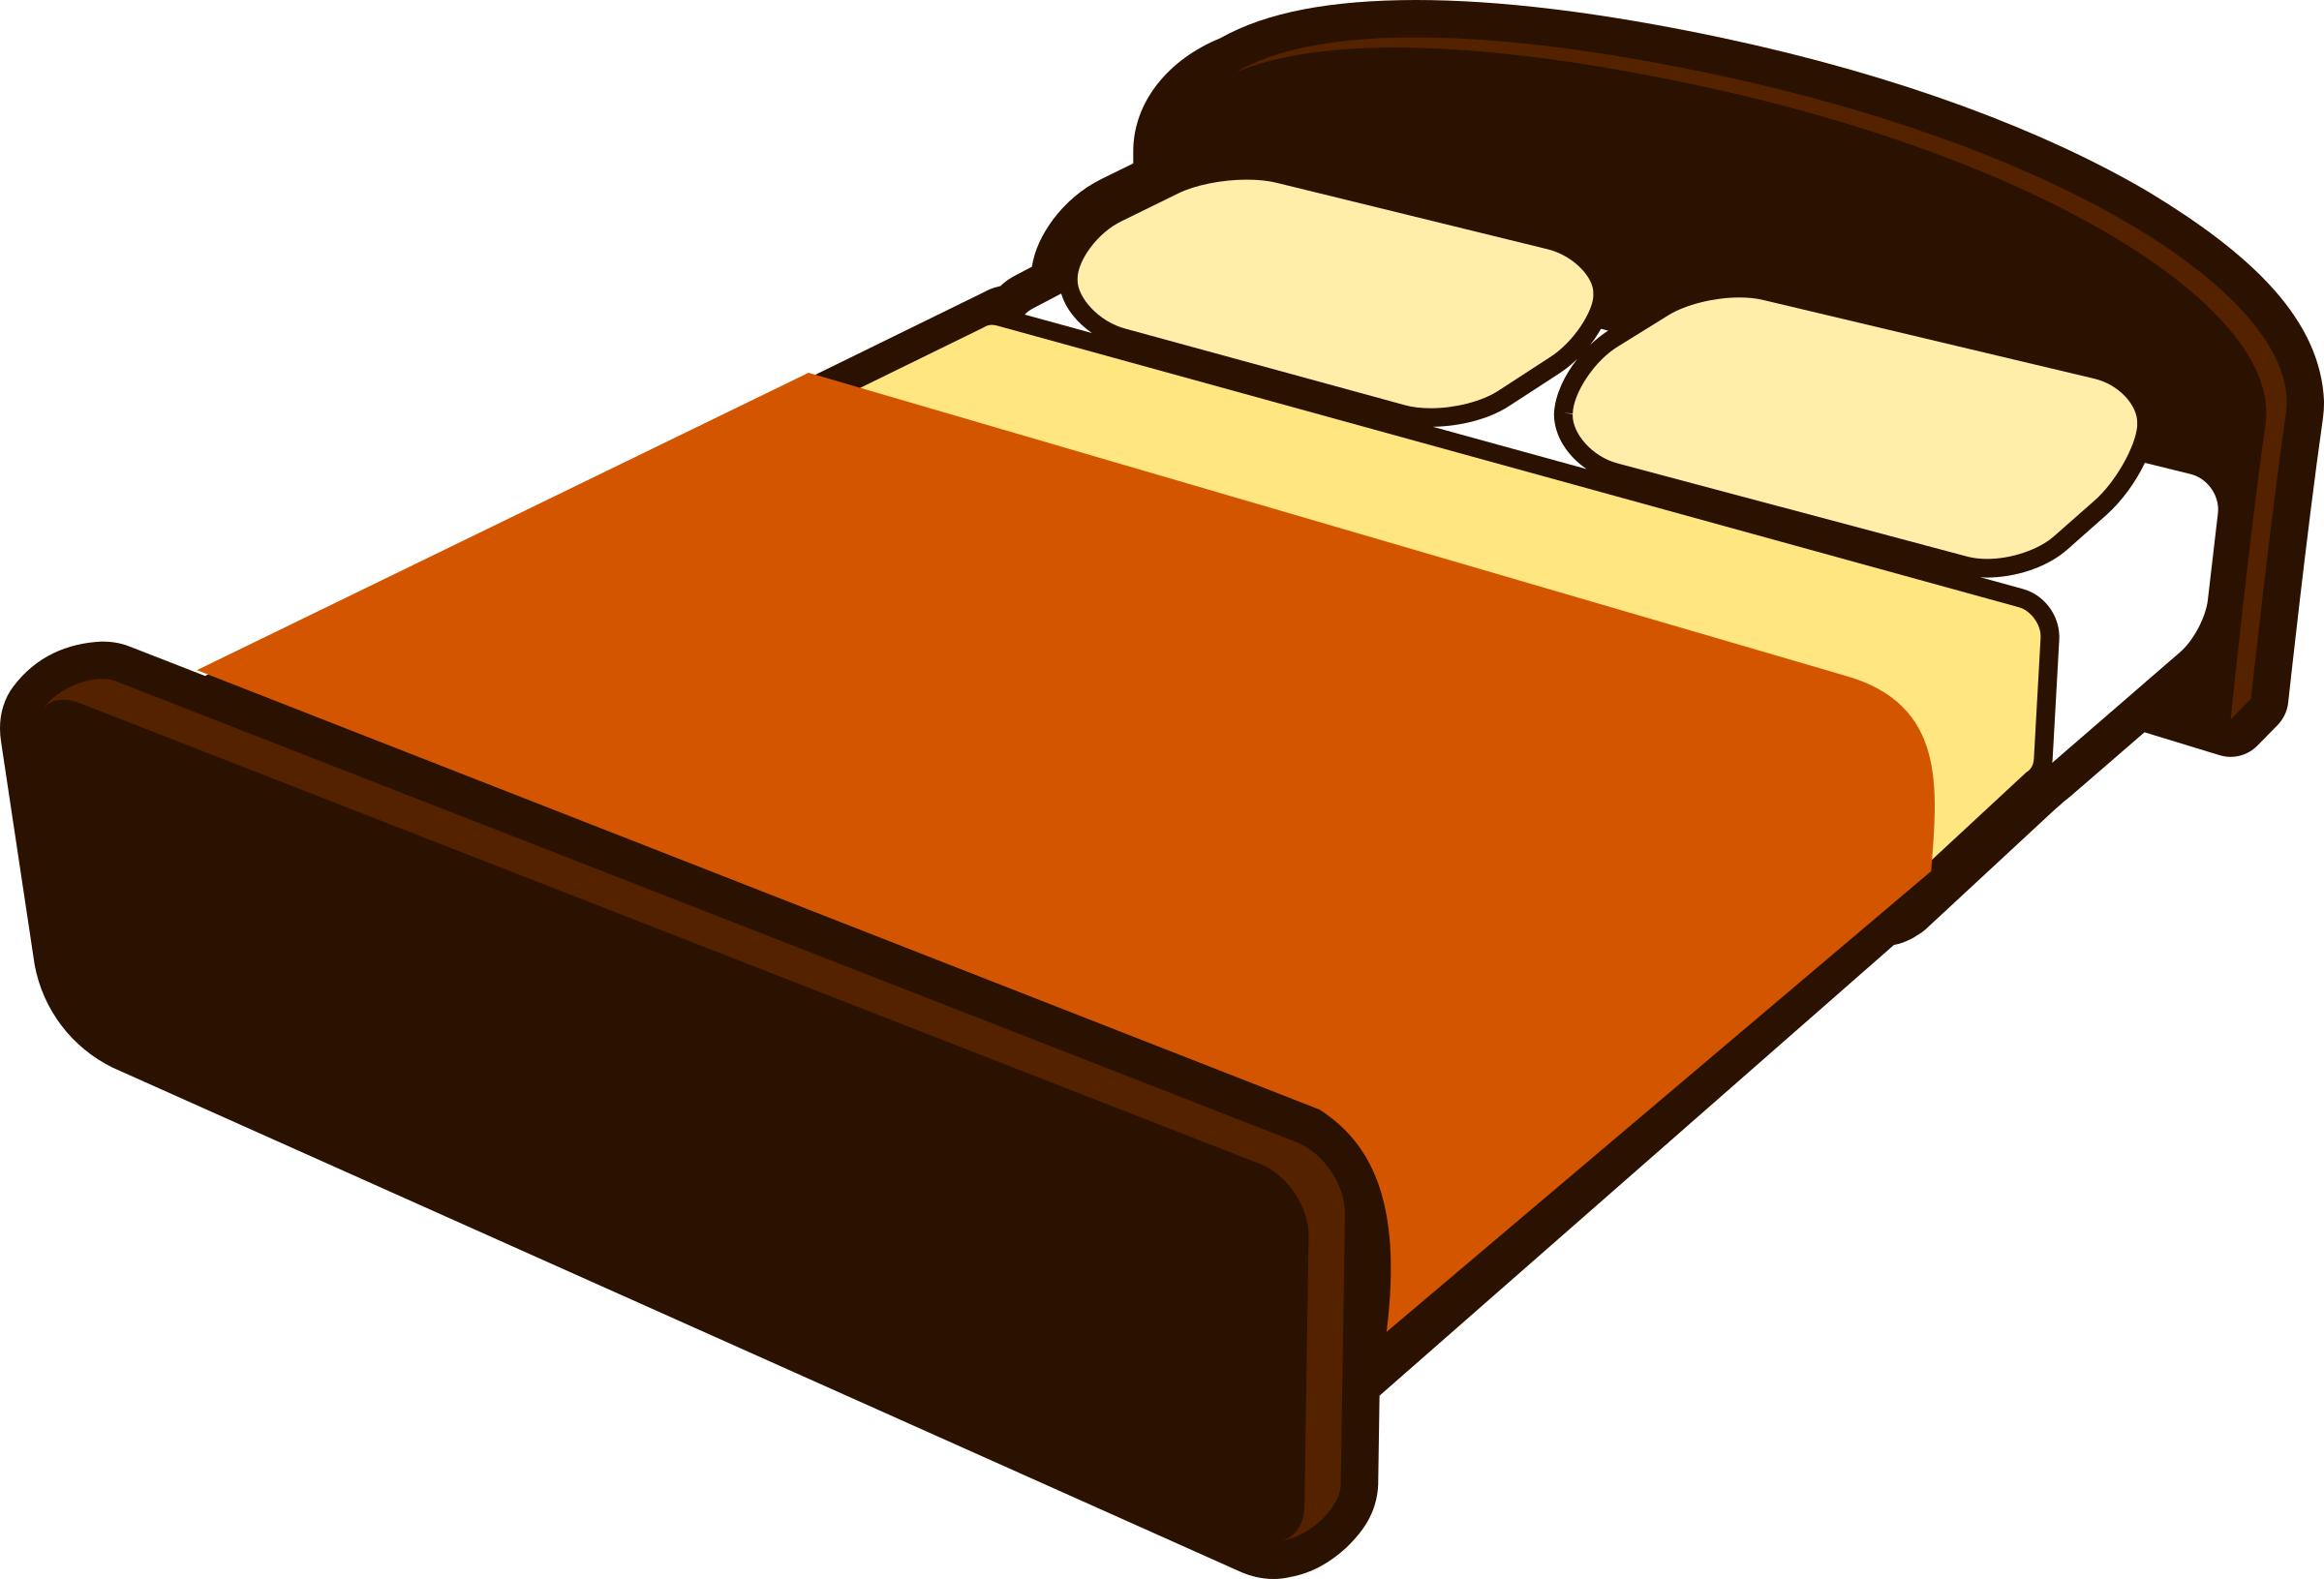 Sleeping clipart bed quilt, Sleeping bed quilt Transparent